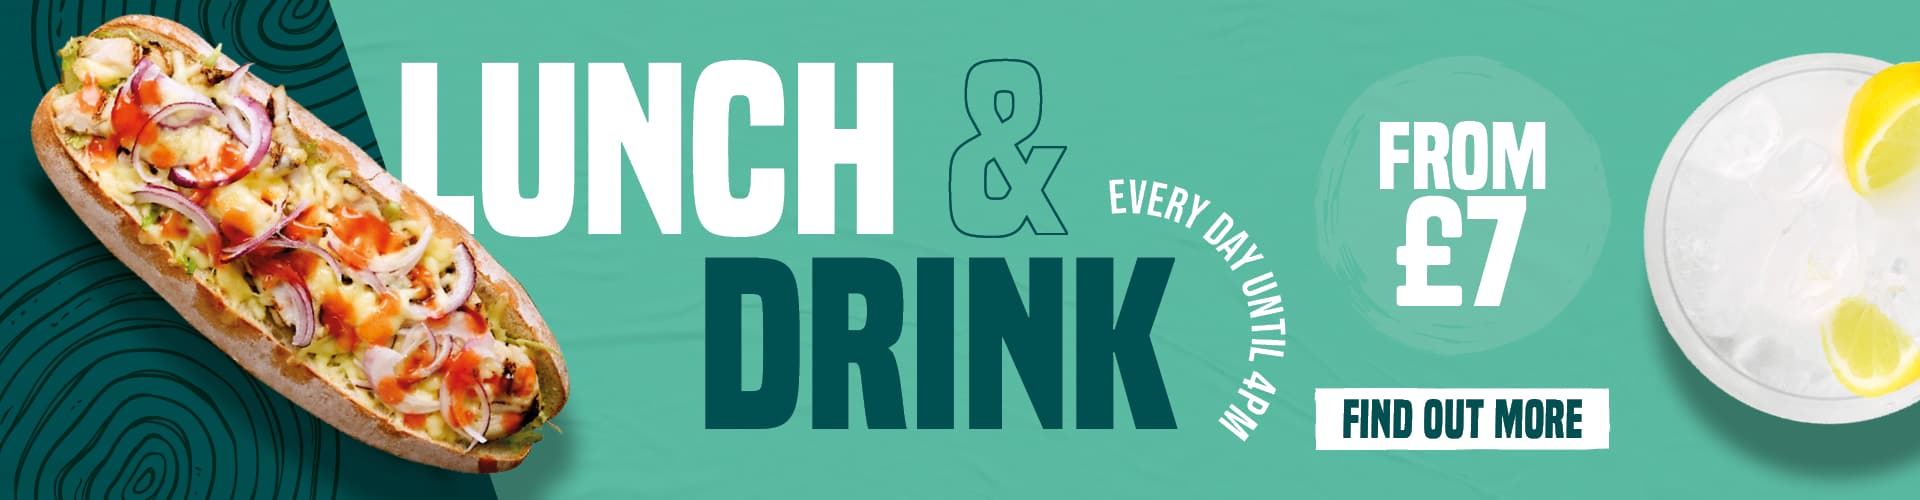 Lunch & Drink, Every Day Until 4pm, From £7. Find Out More.